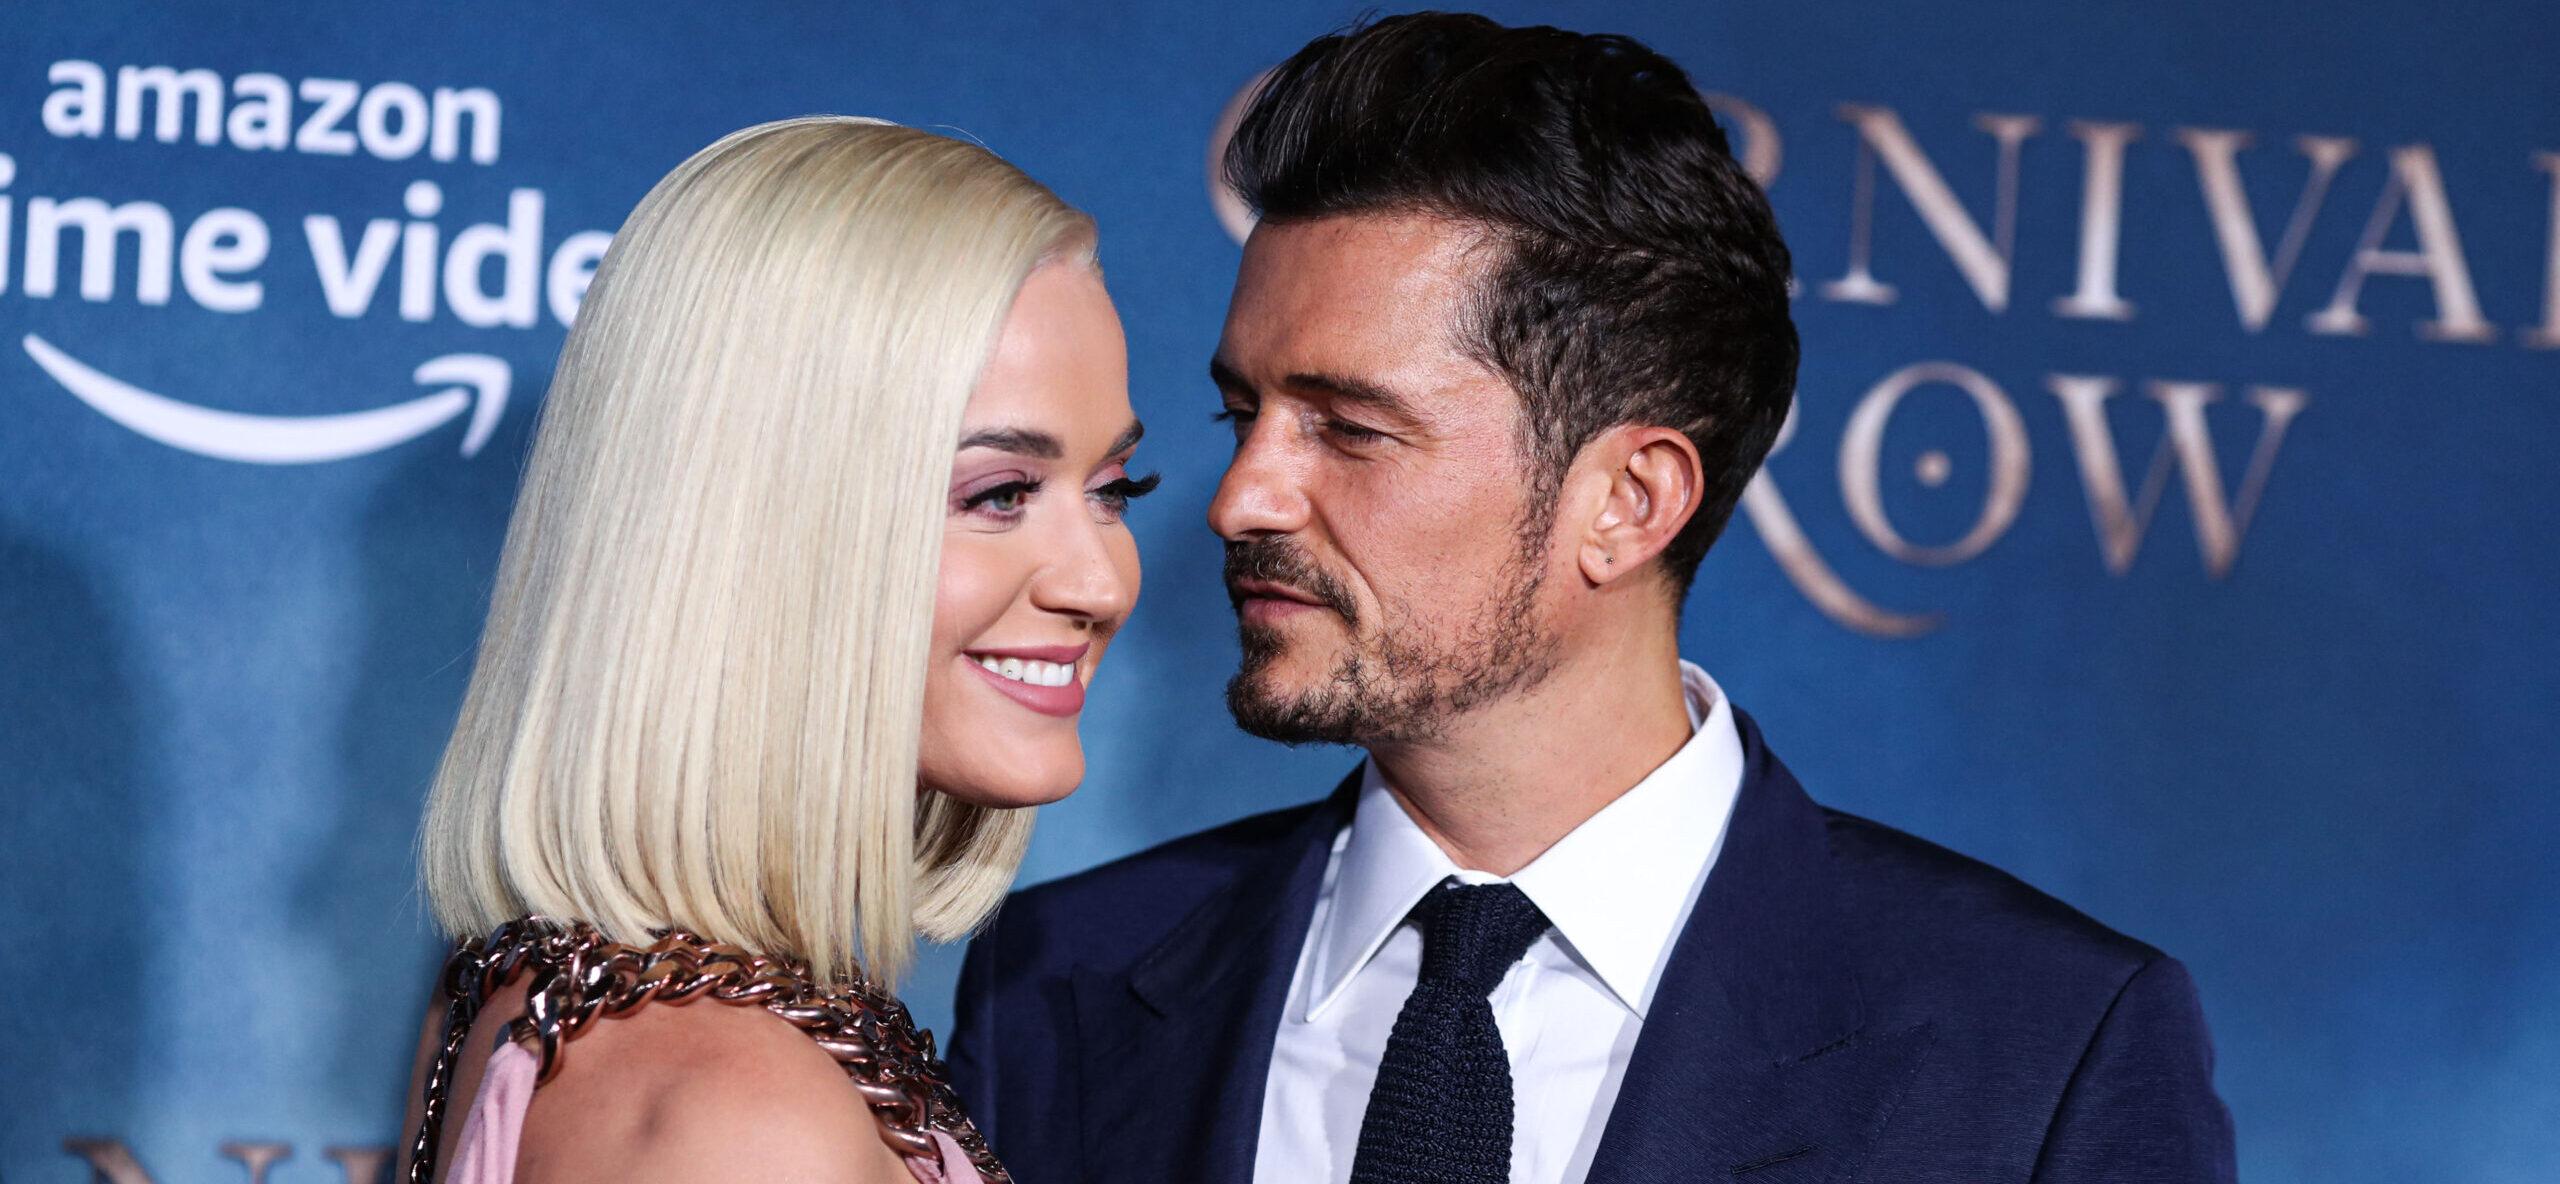 Orlando Bloom Opens Up About Struggles in Relationship with Katy Perry